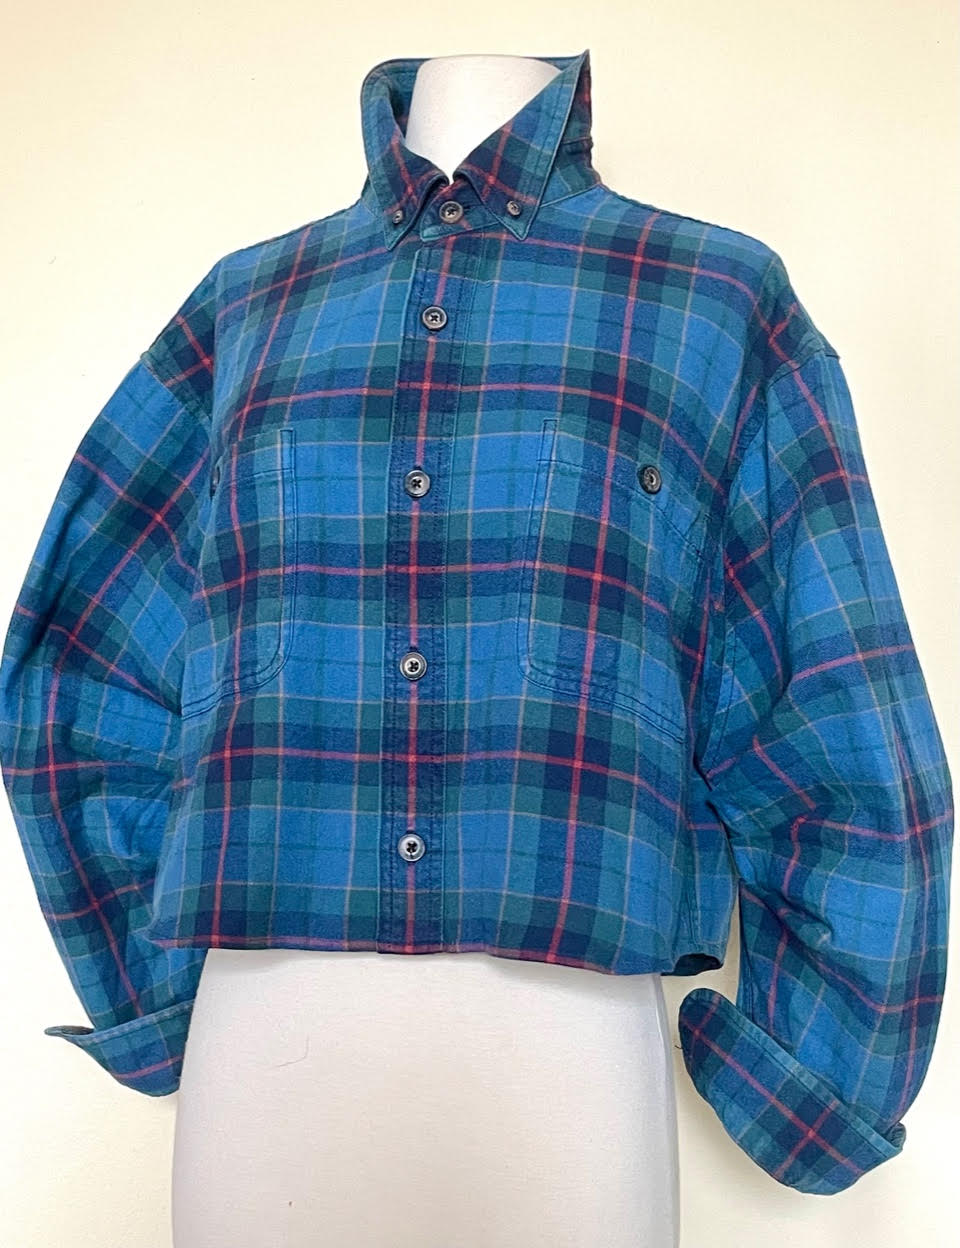 Unbrushed Flannel Long Sleeve Shirt